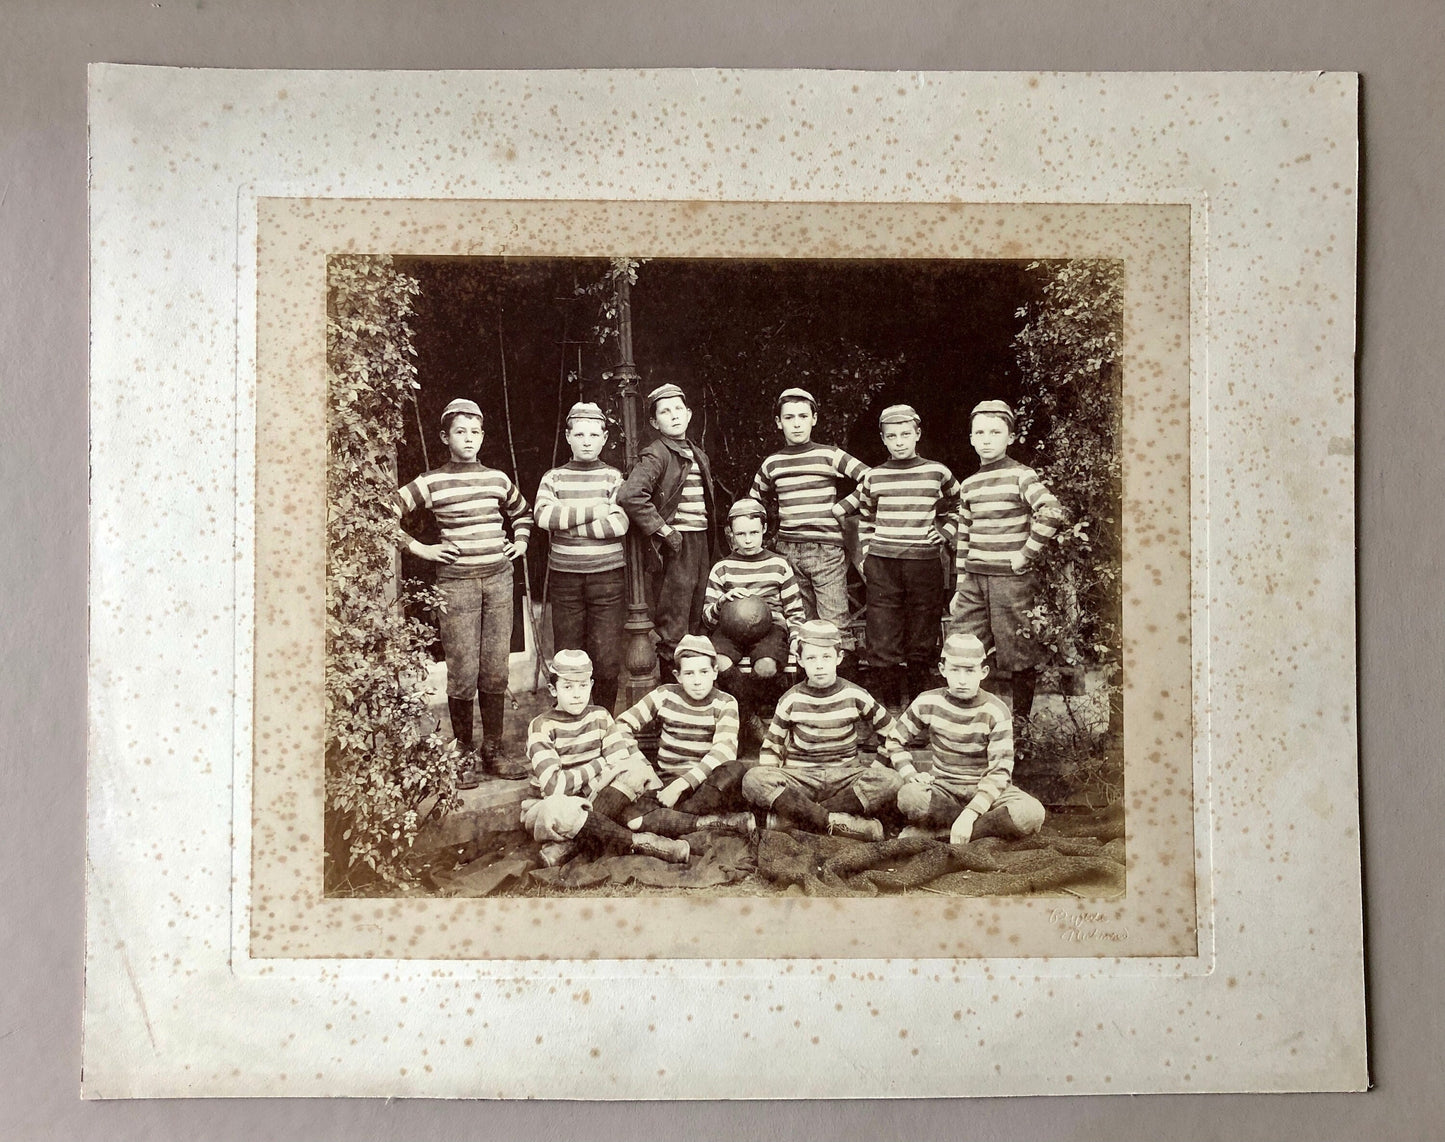 A Large Sepia Coloured Photograph of a Football Team. Byrne & Co. Undated - I assume early 1900’s. Size: 27 x 34 cms. Very Good Condition.